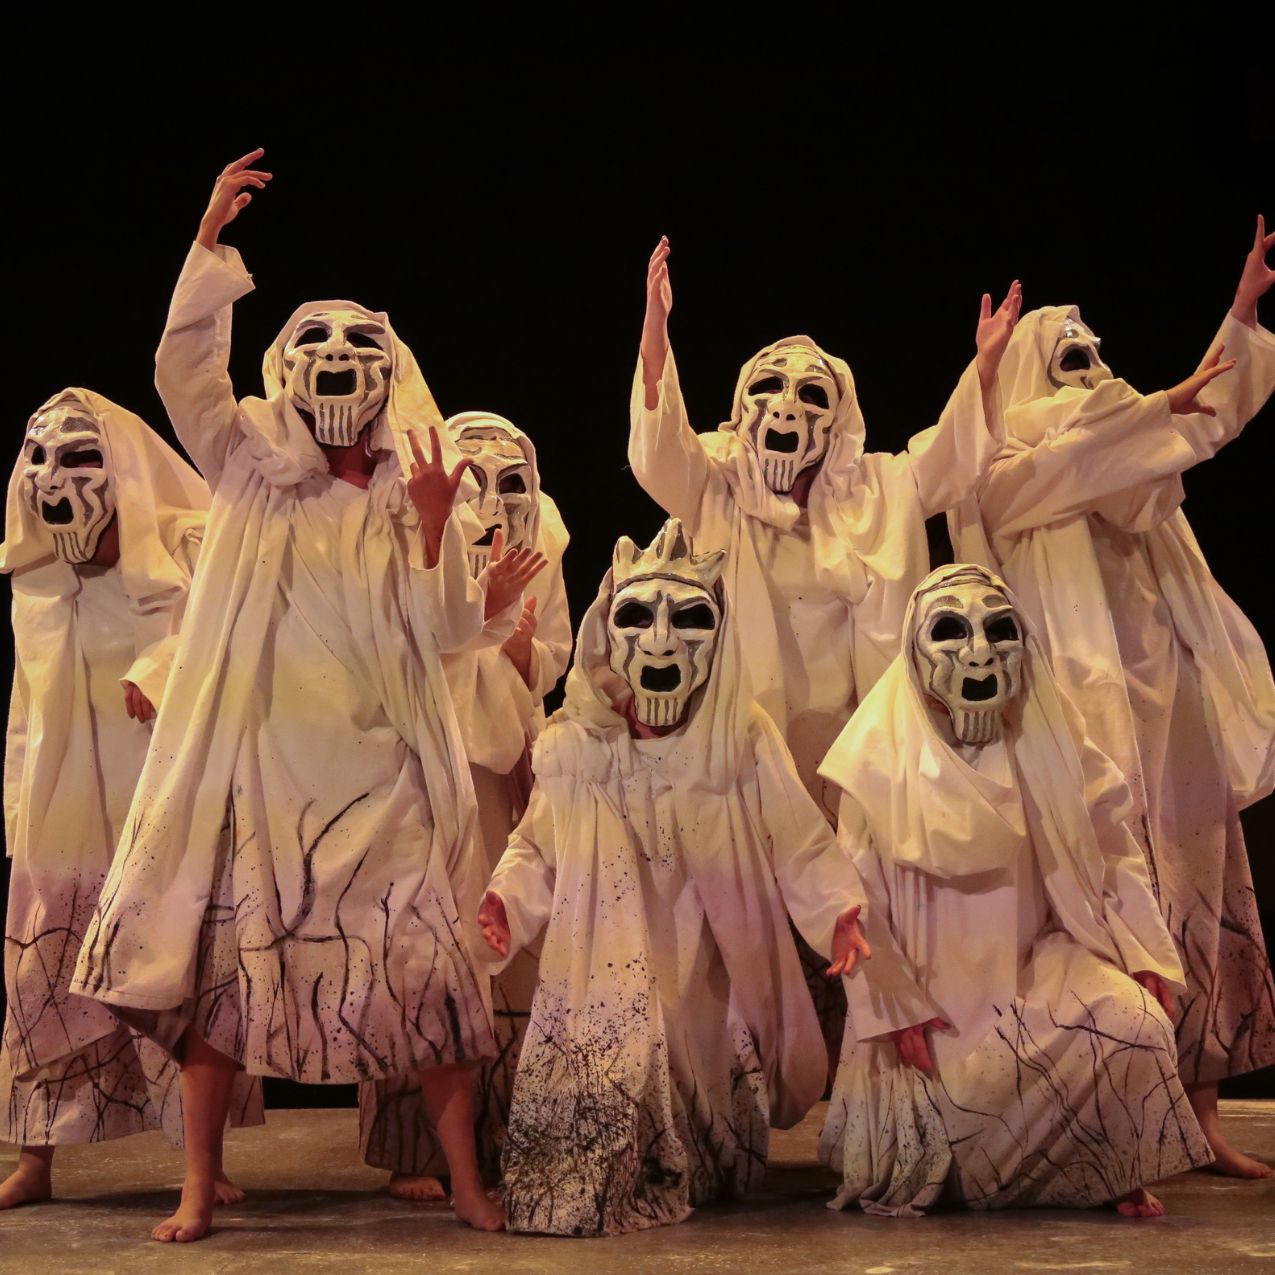 The chorus in the Greek tragedy Burial at Thebes, is onstage. It is dark. The chorus members are all dressed in white rags with white face masks. Their arms are uplifted in a pose of mourning.